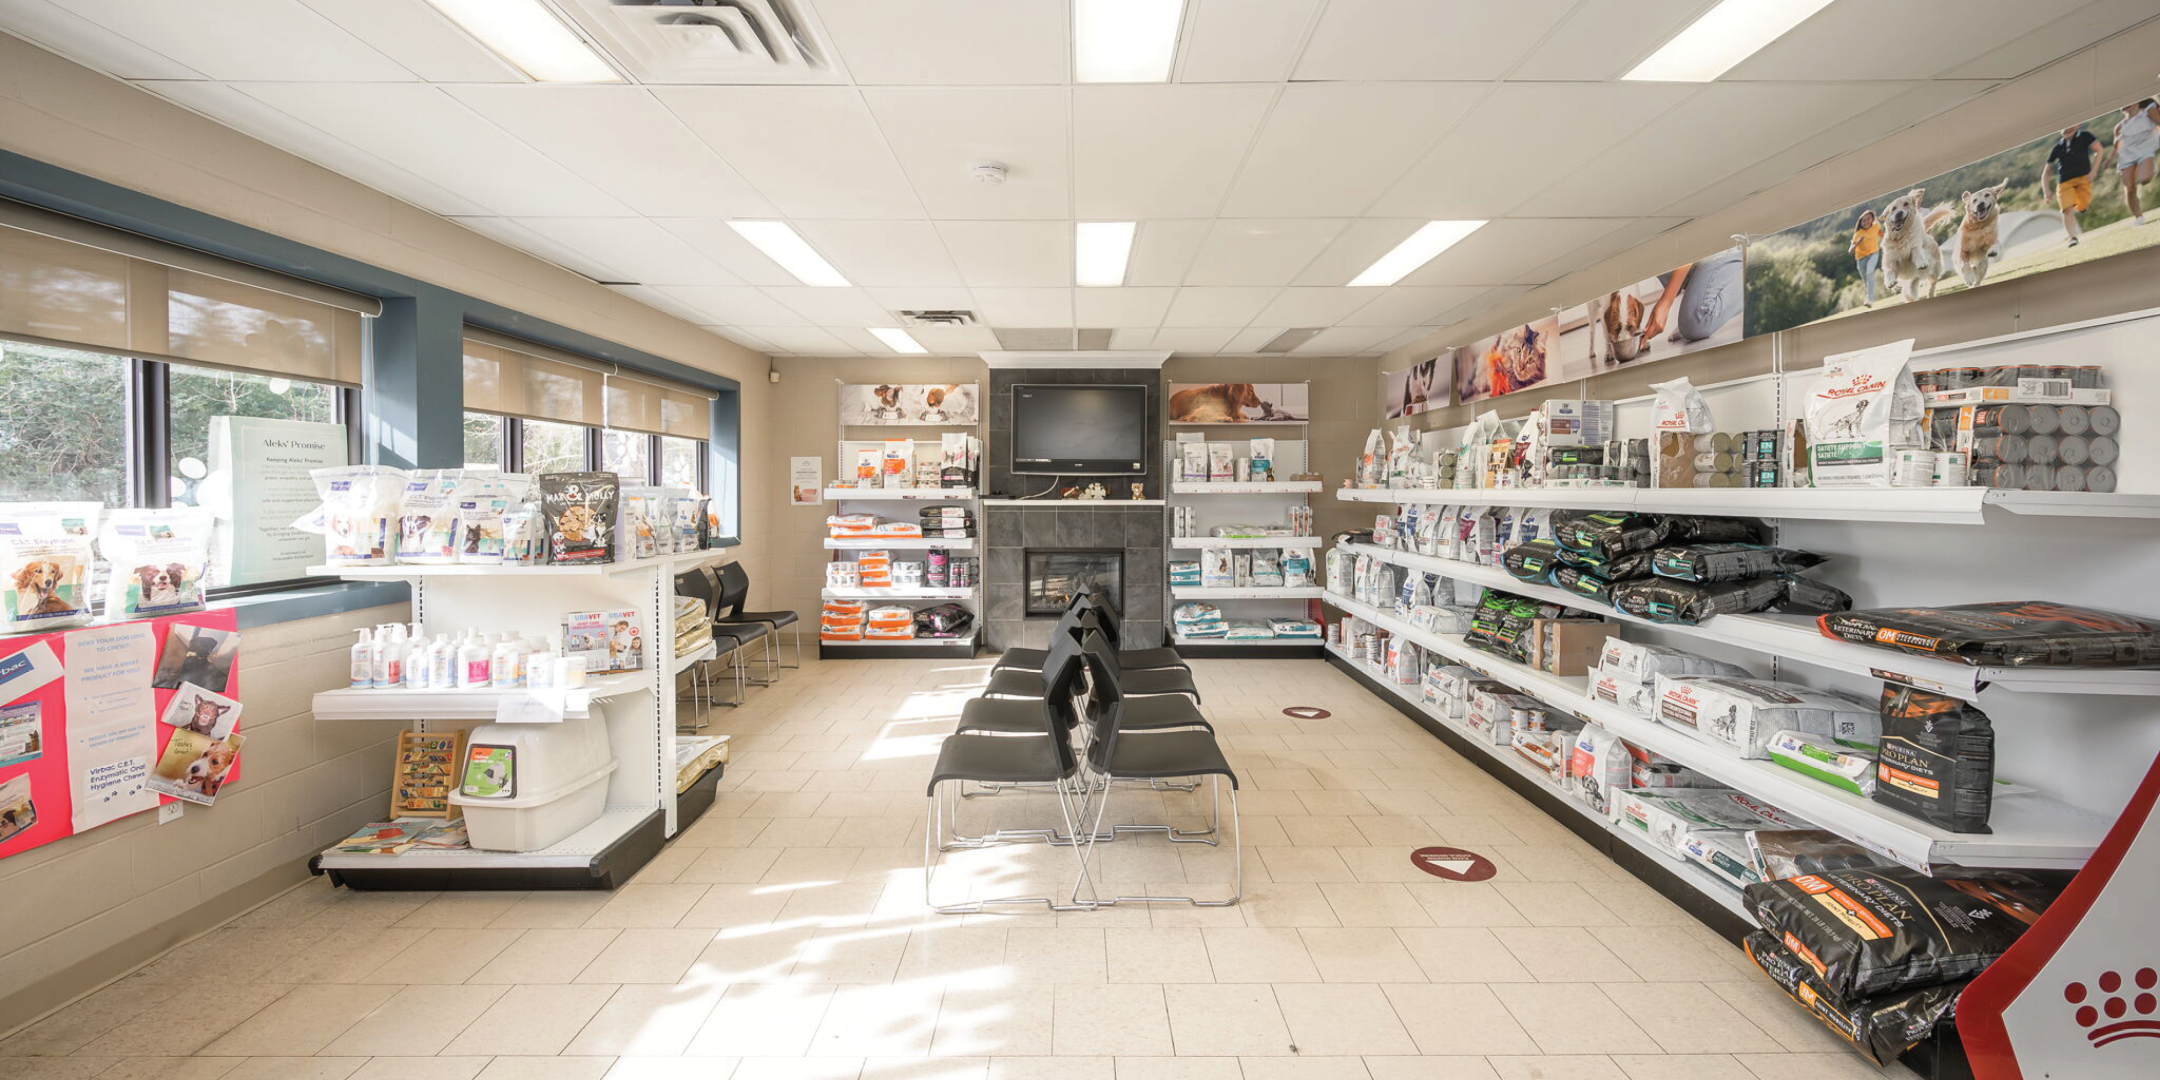 415 Queensway West Waiting Area with Shelves of Product for Sale